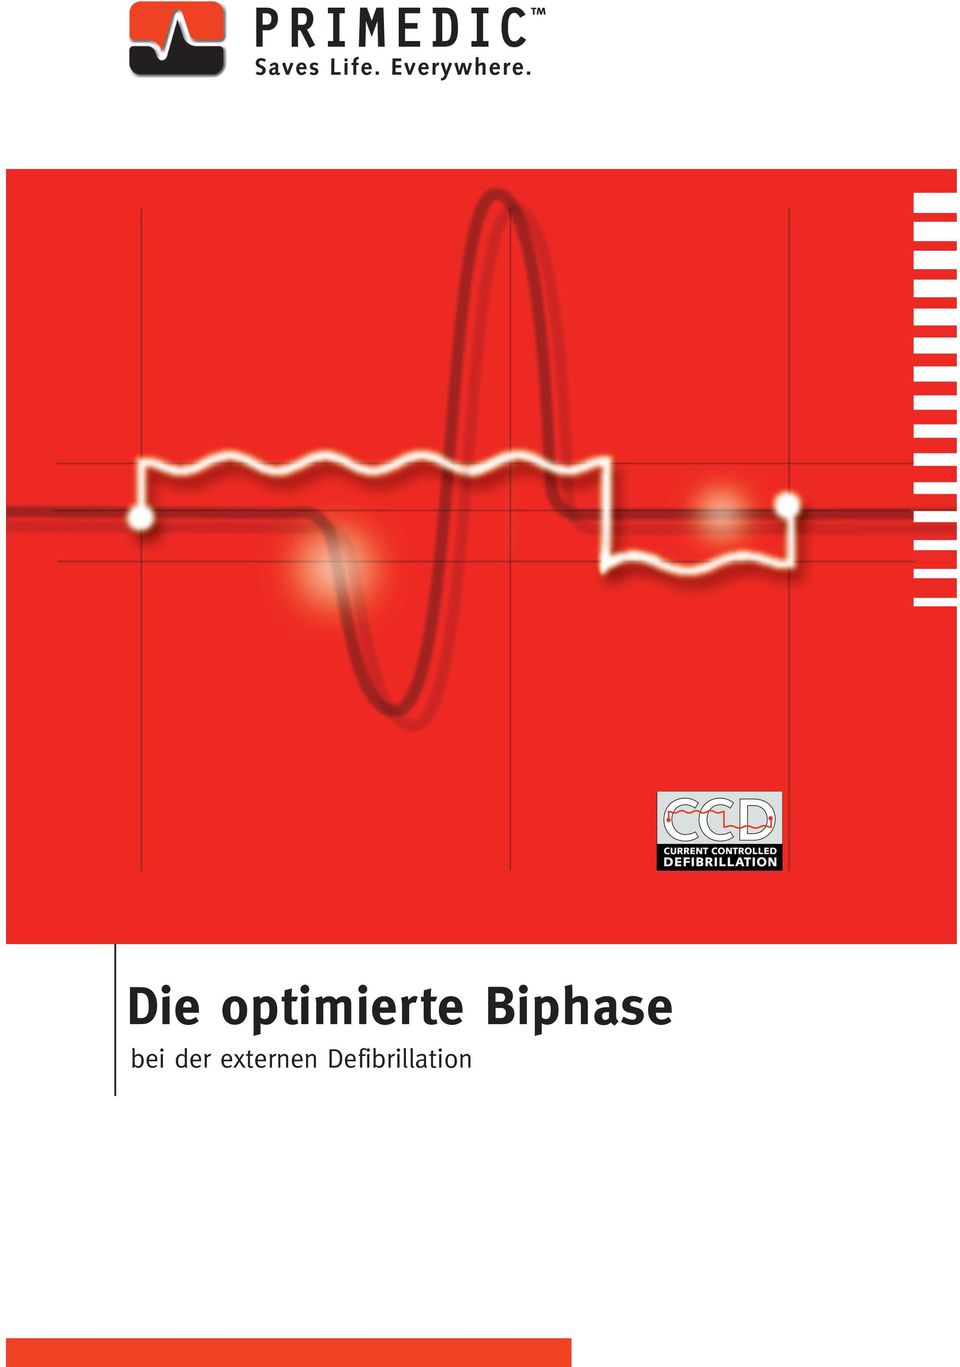 Biphase bei